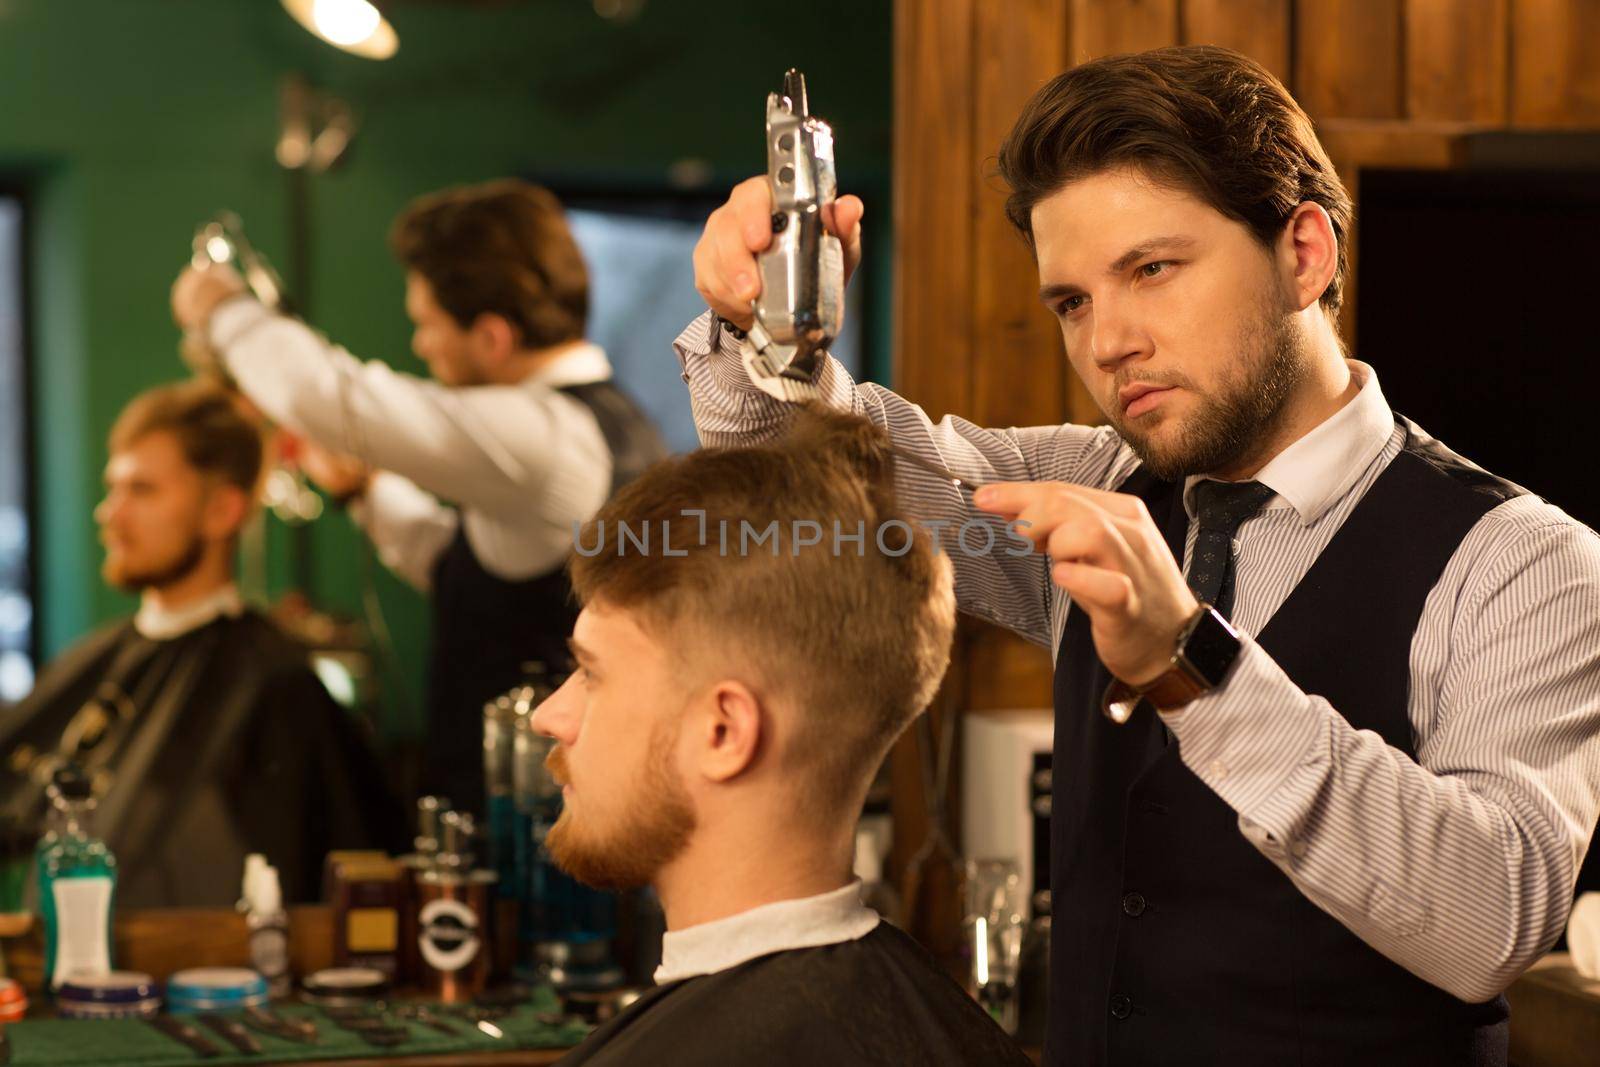 Attractive bearded professional barber giving his male client a haircut using electric trimmer clipper professionalism styling hairdressing occupation career job traditional barbering barbershop service.